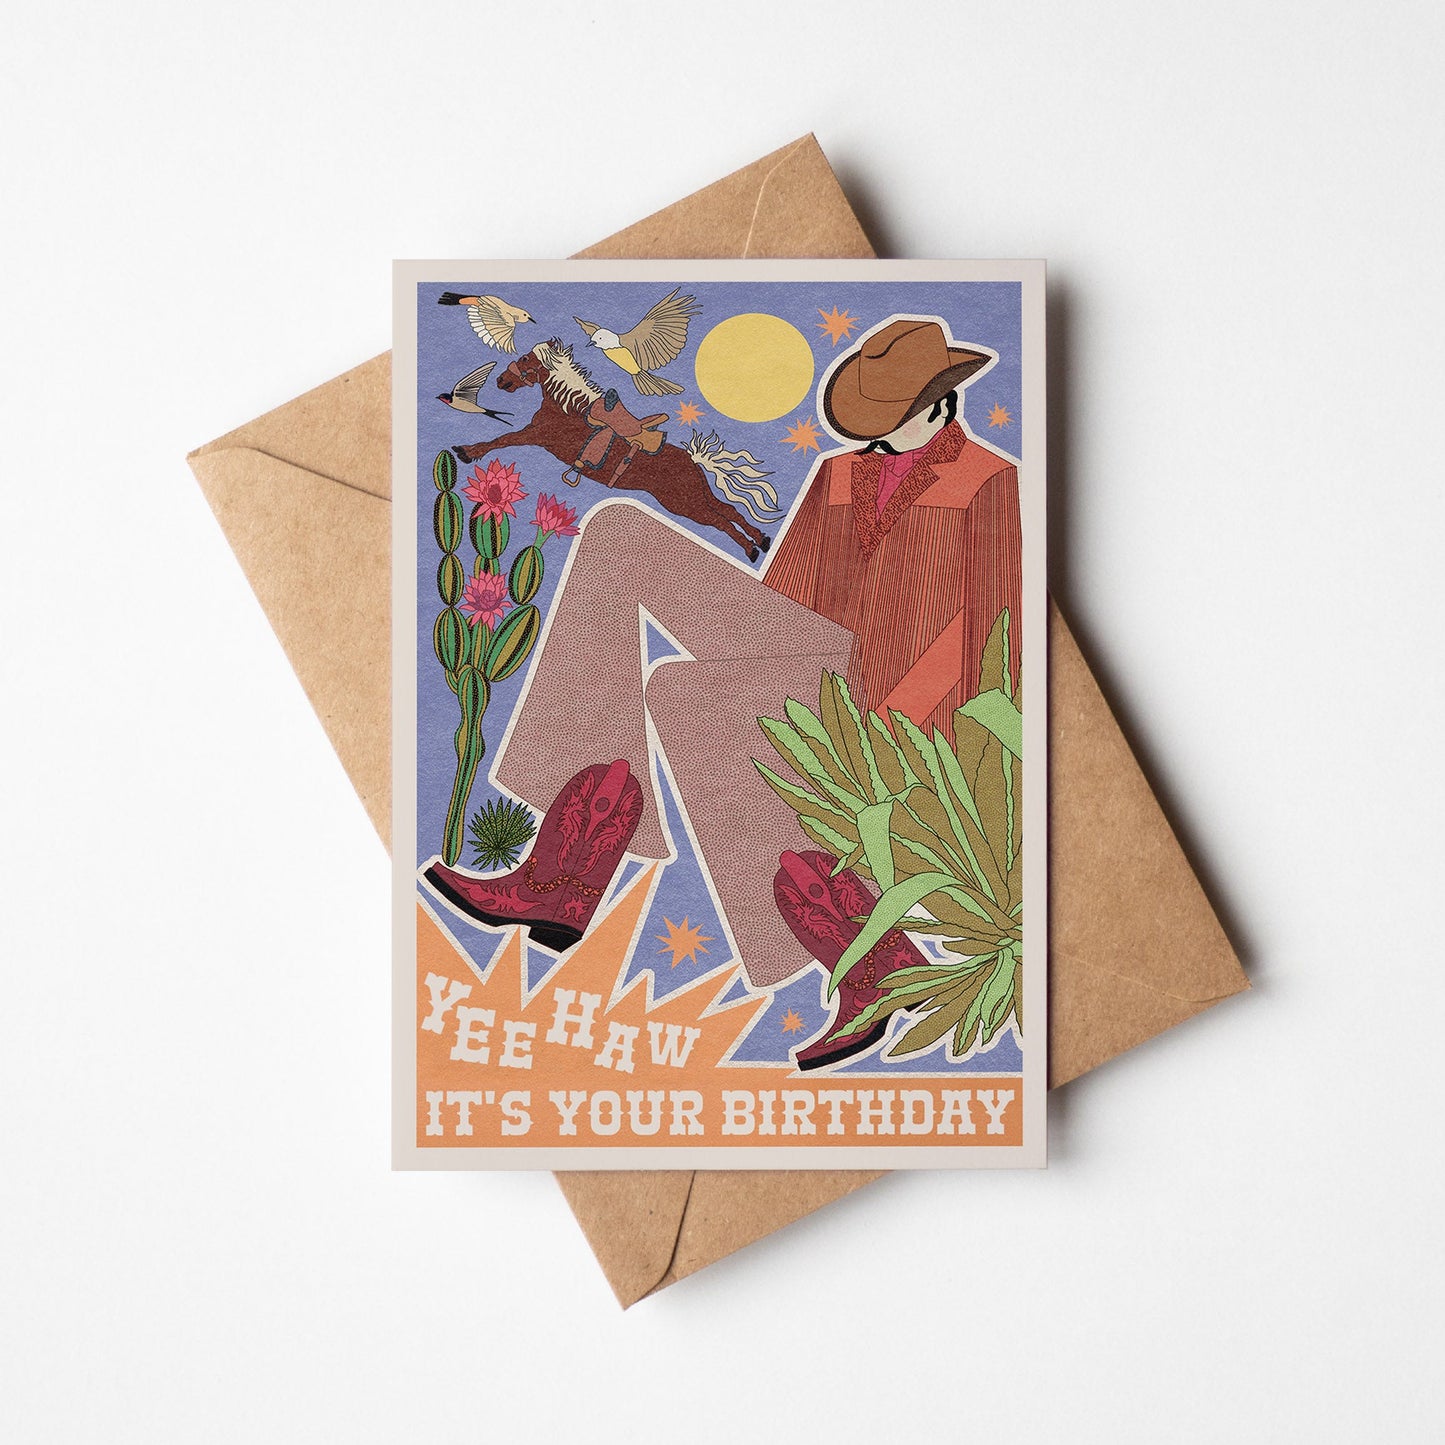 Cowboy 'Yeehaw!' A6 Birthday Card with Kraft (brown) envelope | 100% recycled-0